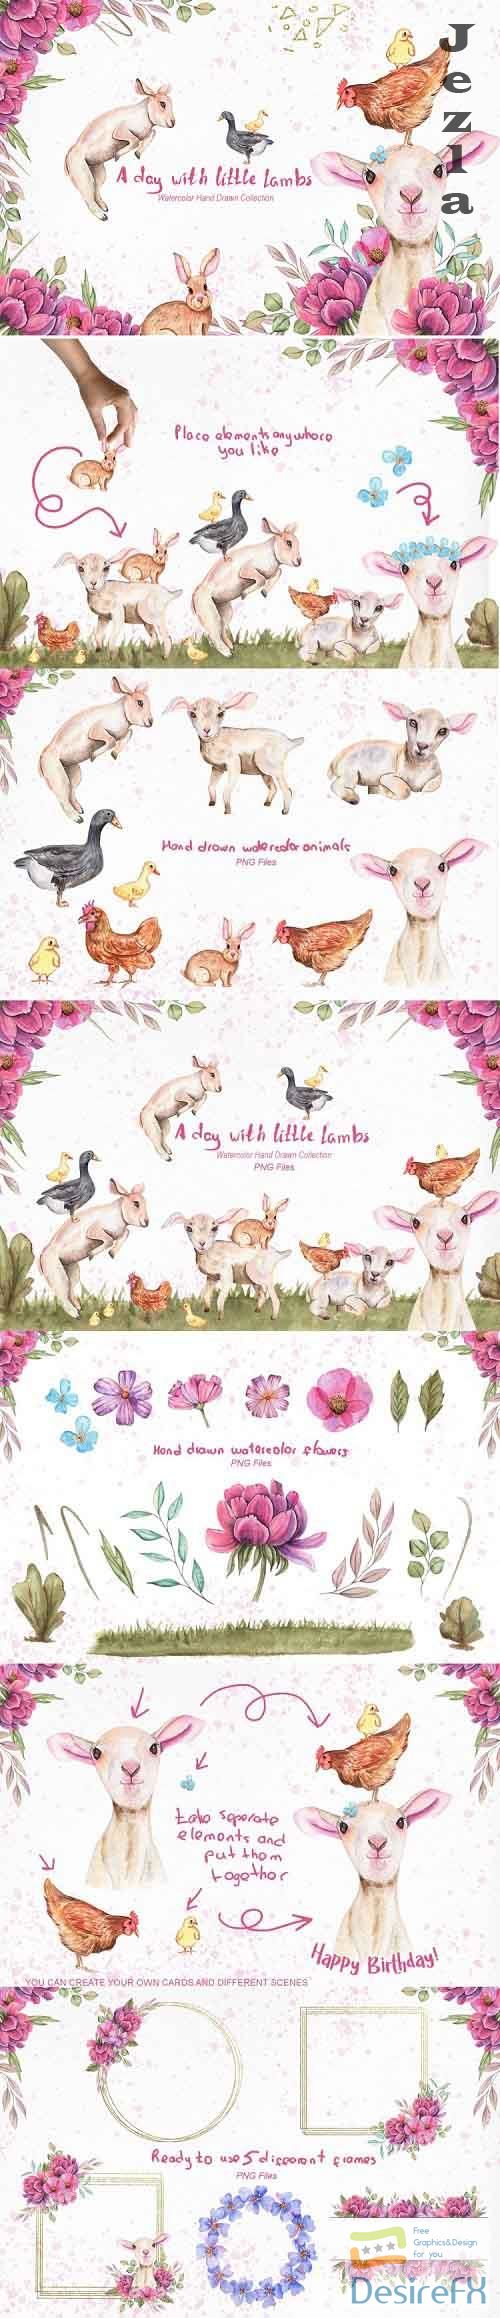 Watercolor Day with little Lambs  - 5004825